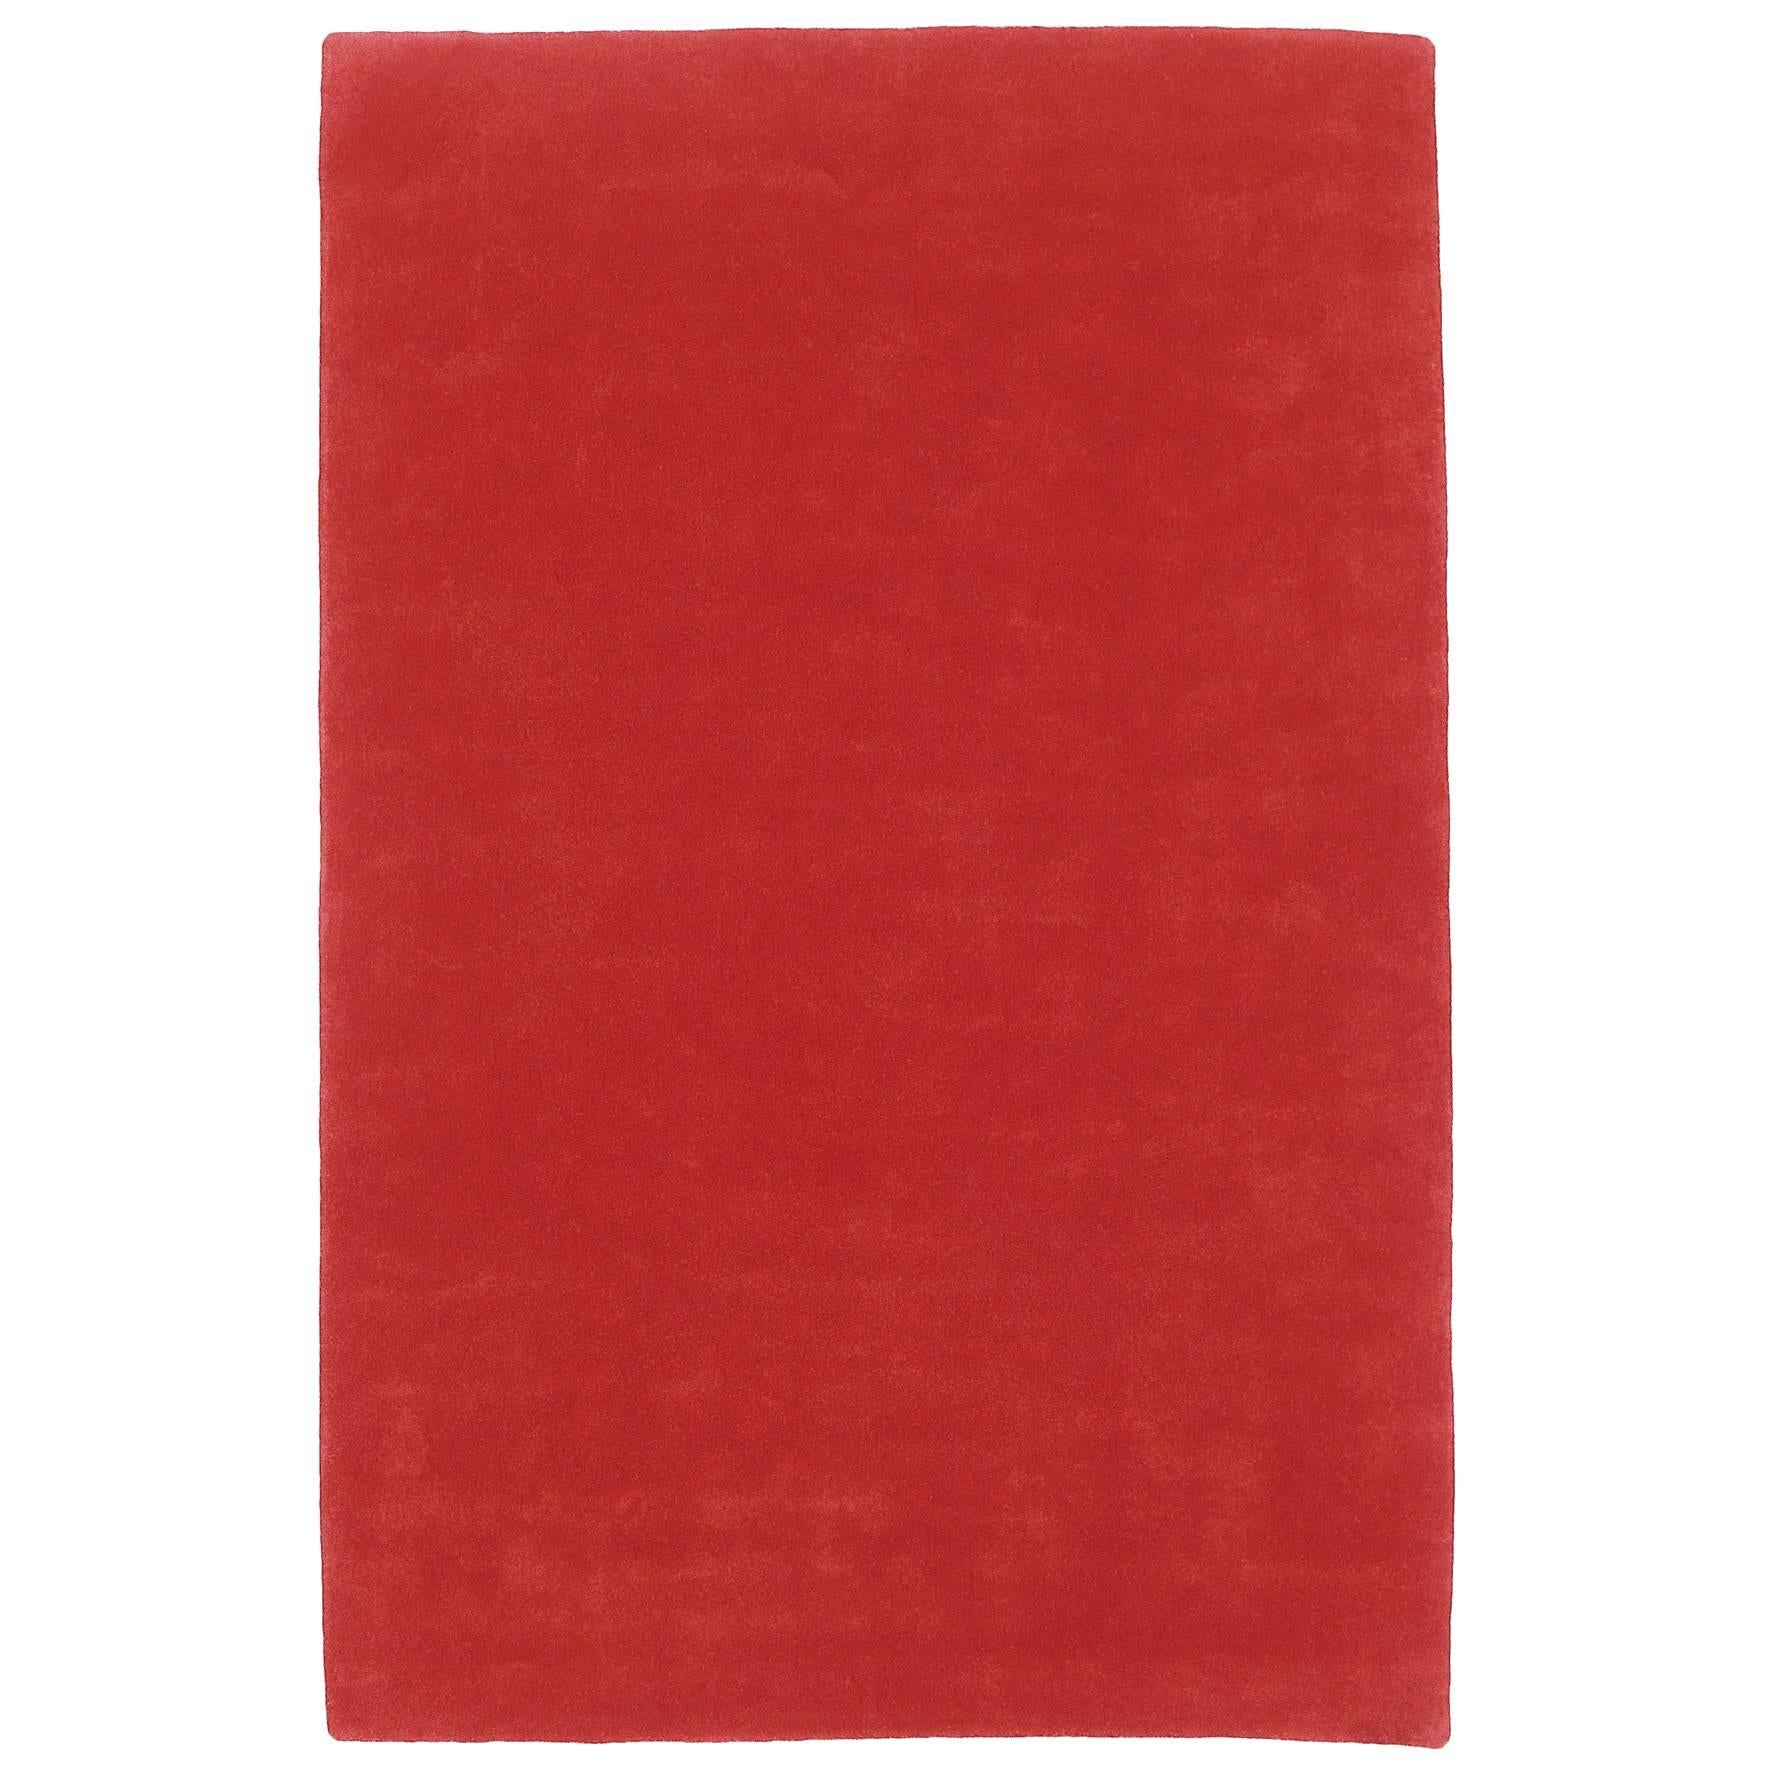 Hand-Tufted Nanimarquina Flying Carpet 1 Rug in Red, Large